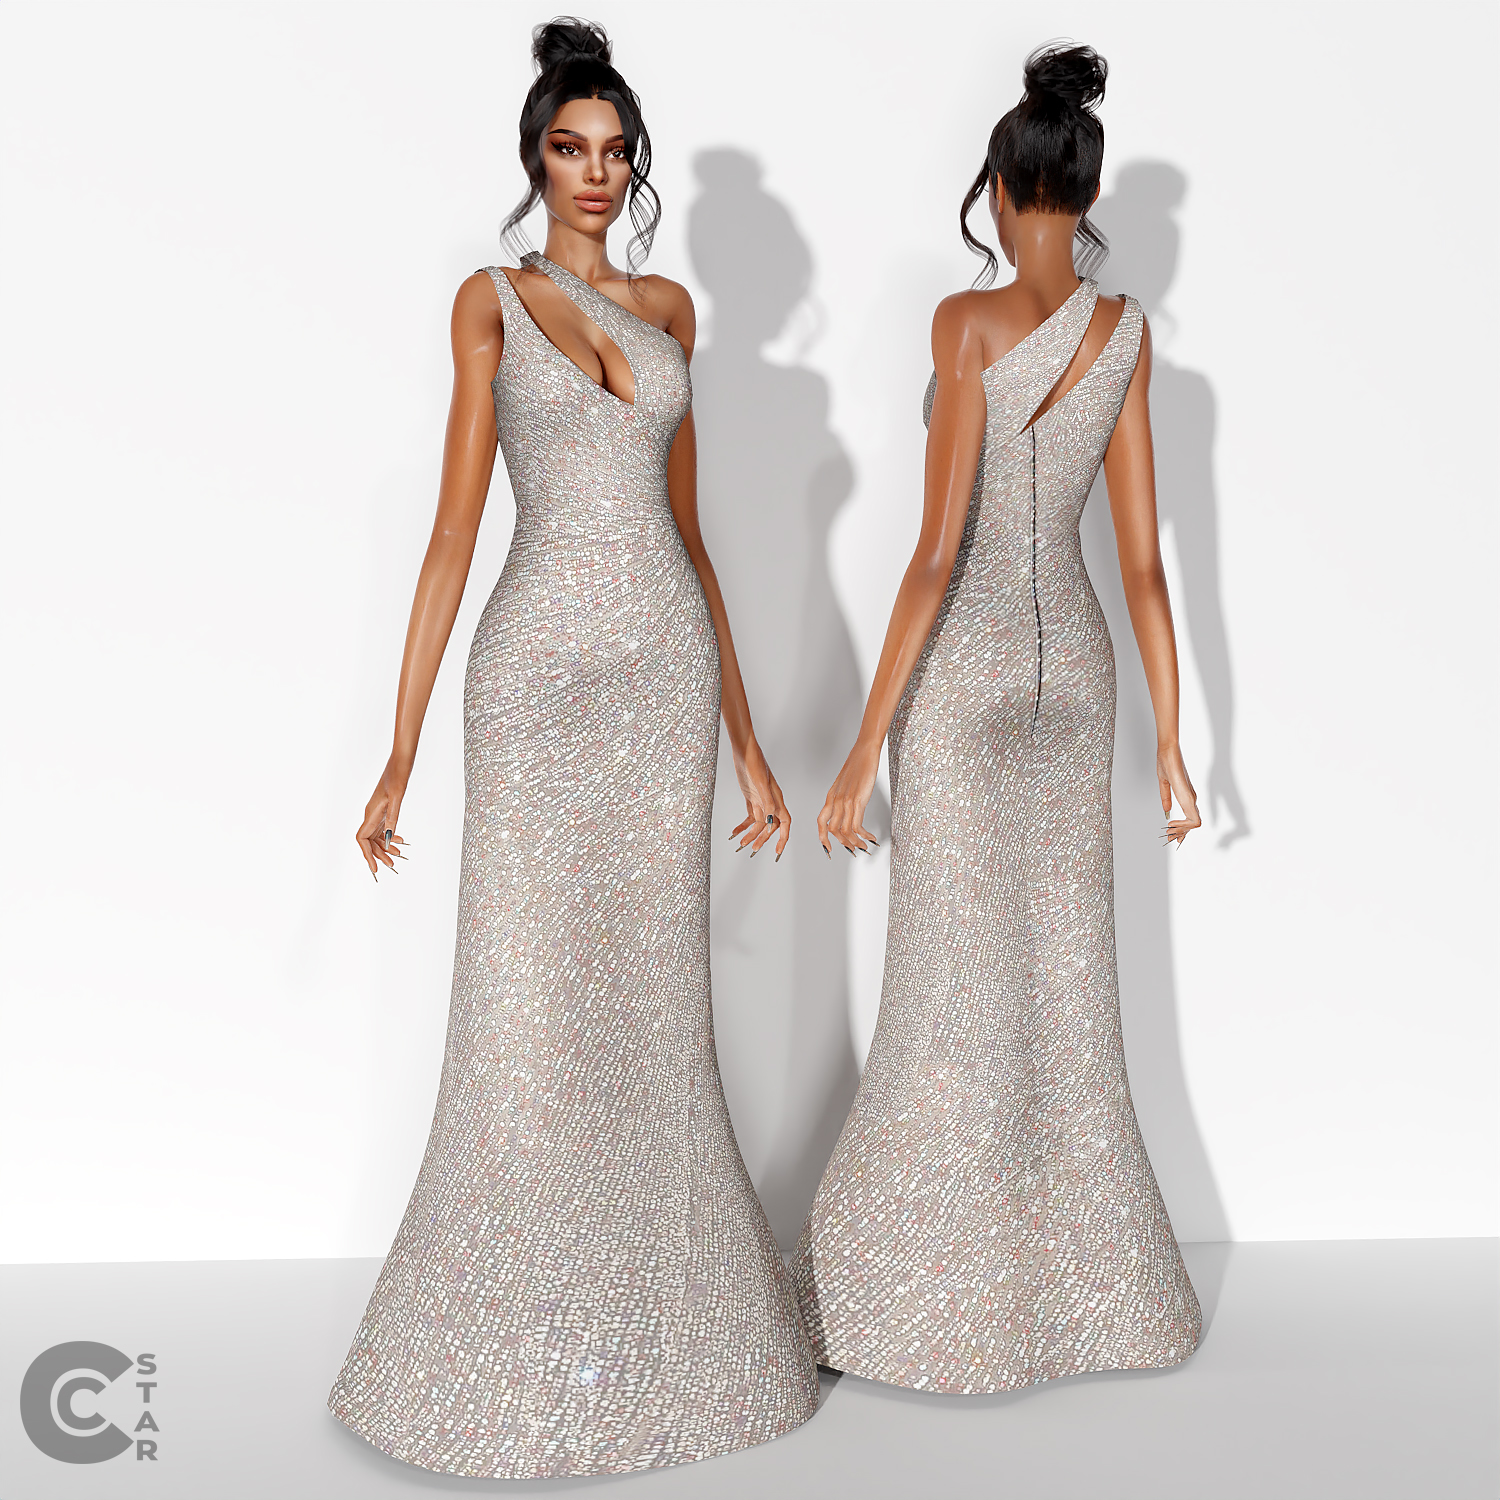 Sparkly Evening Gown - The Sims 4 Create a Sim - CurseForge